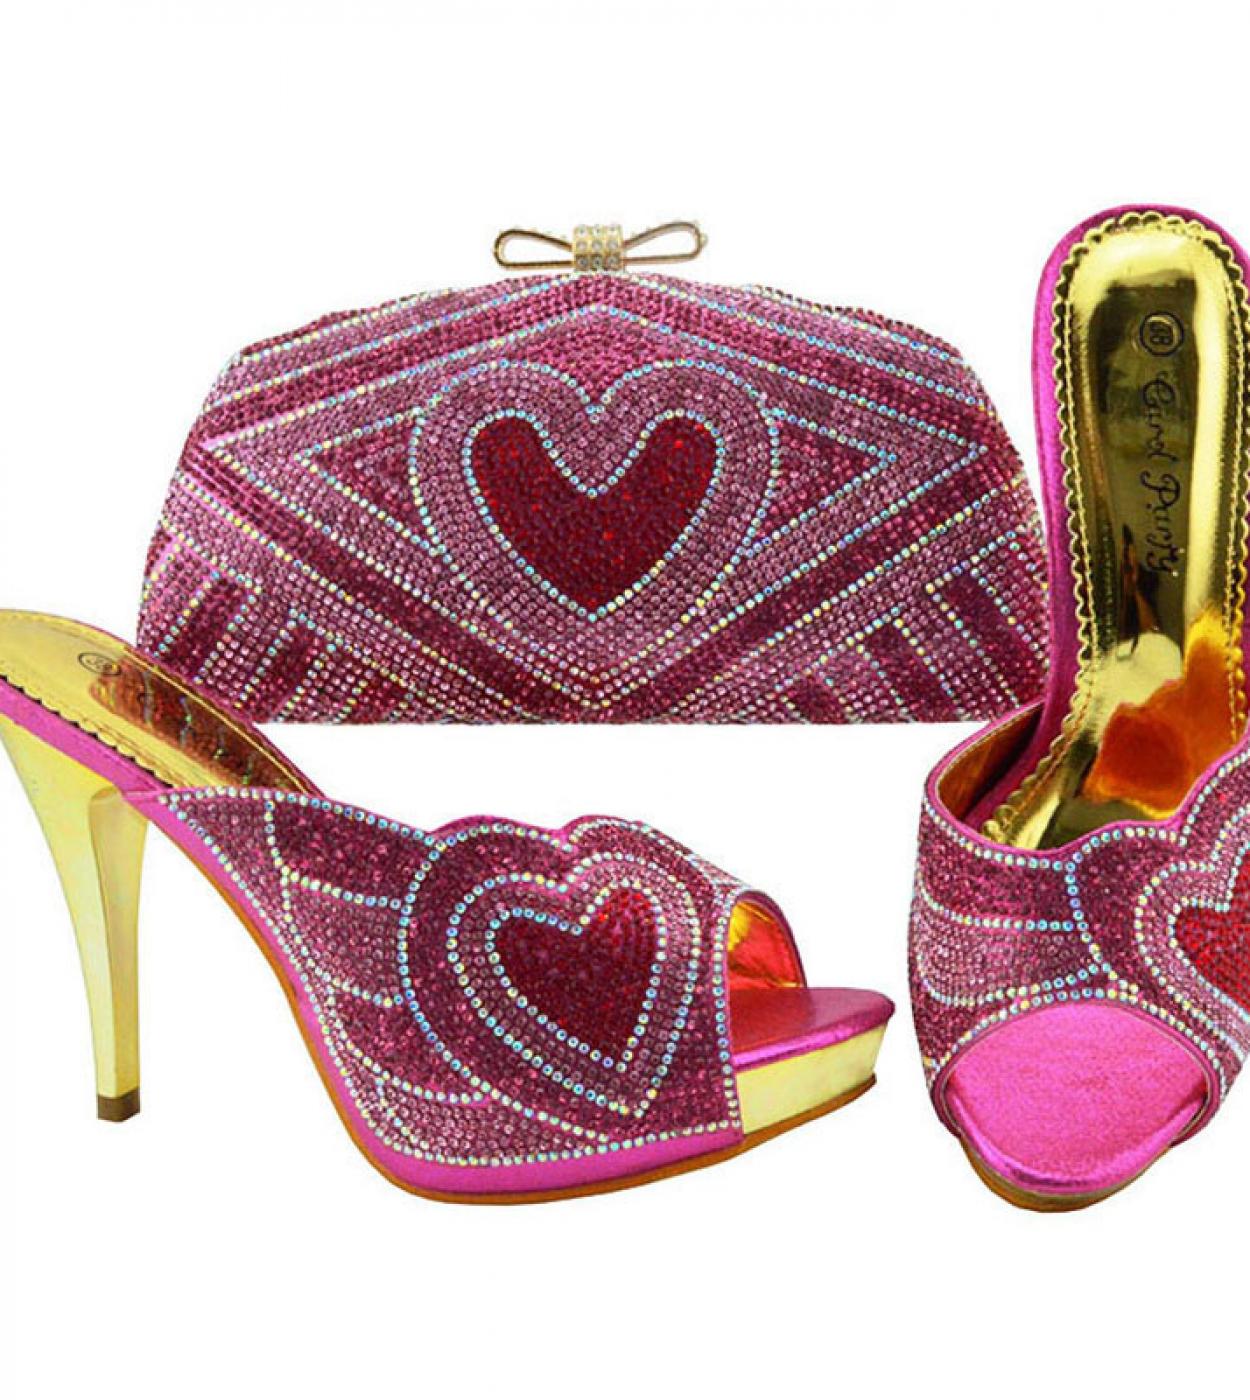 New Arrival Italian Design Ladies Shoes And Bag With Wedding Shoes And Bag For Women Nigeria Bag And Shoes Fuchsia Color